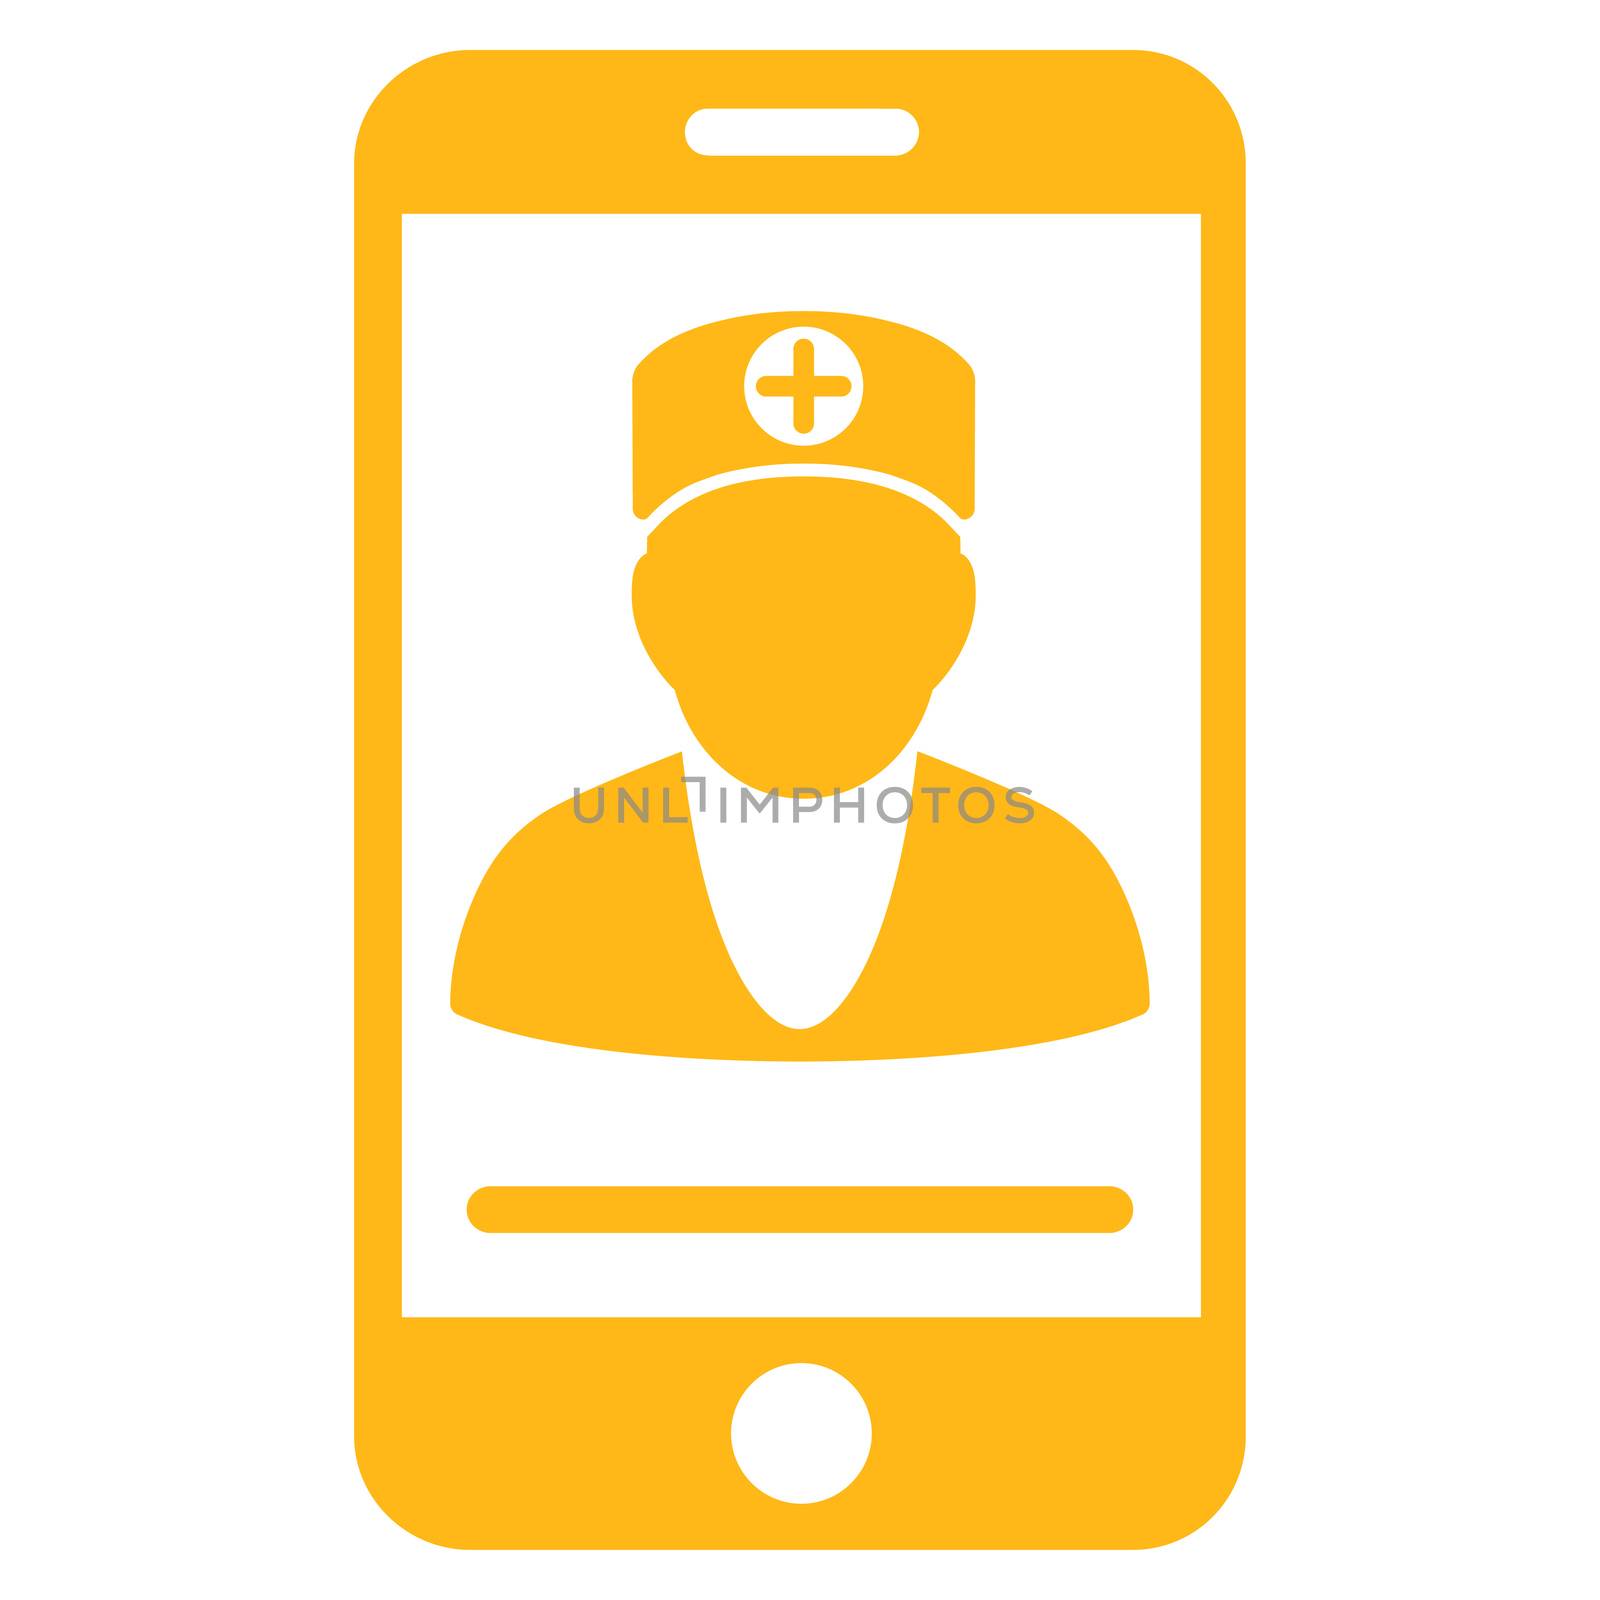 Online Doctor raster icon. Style is flat symbol, yellow color, rounded angles, white background.